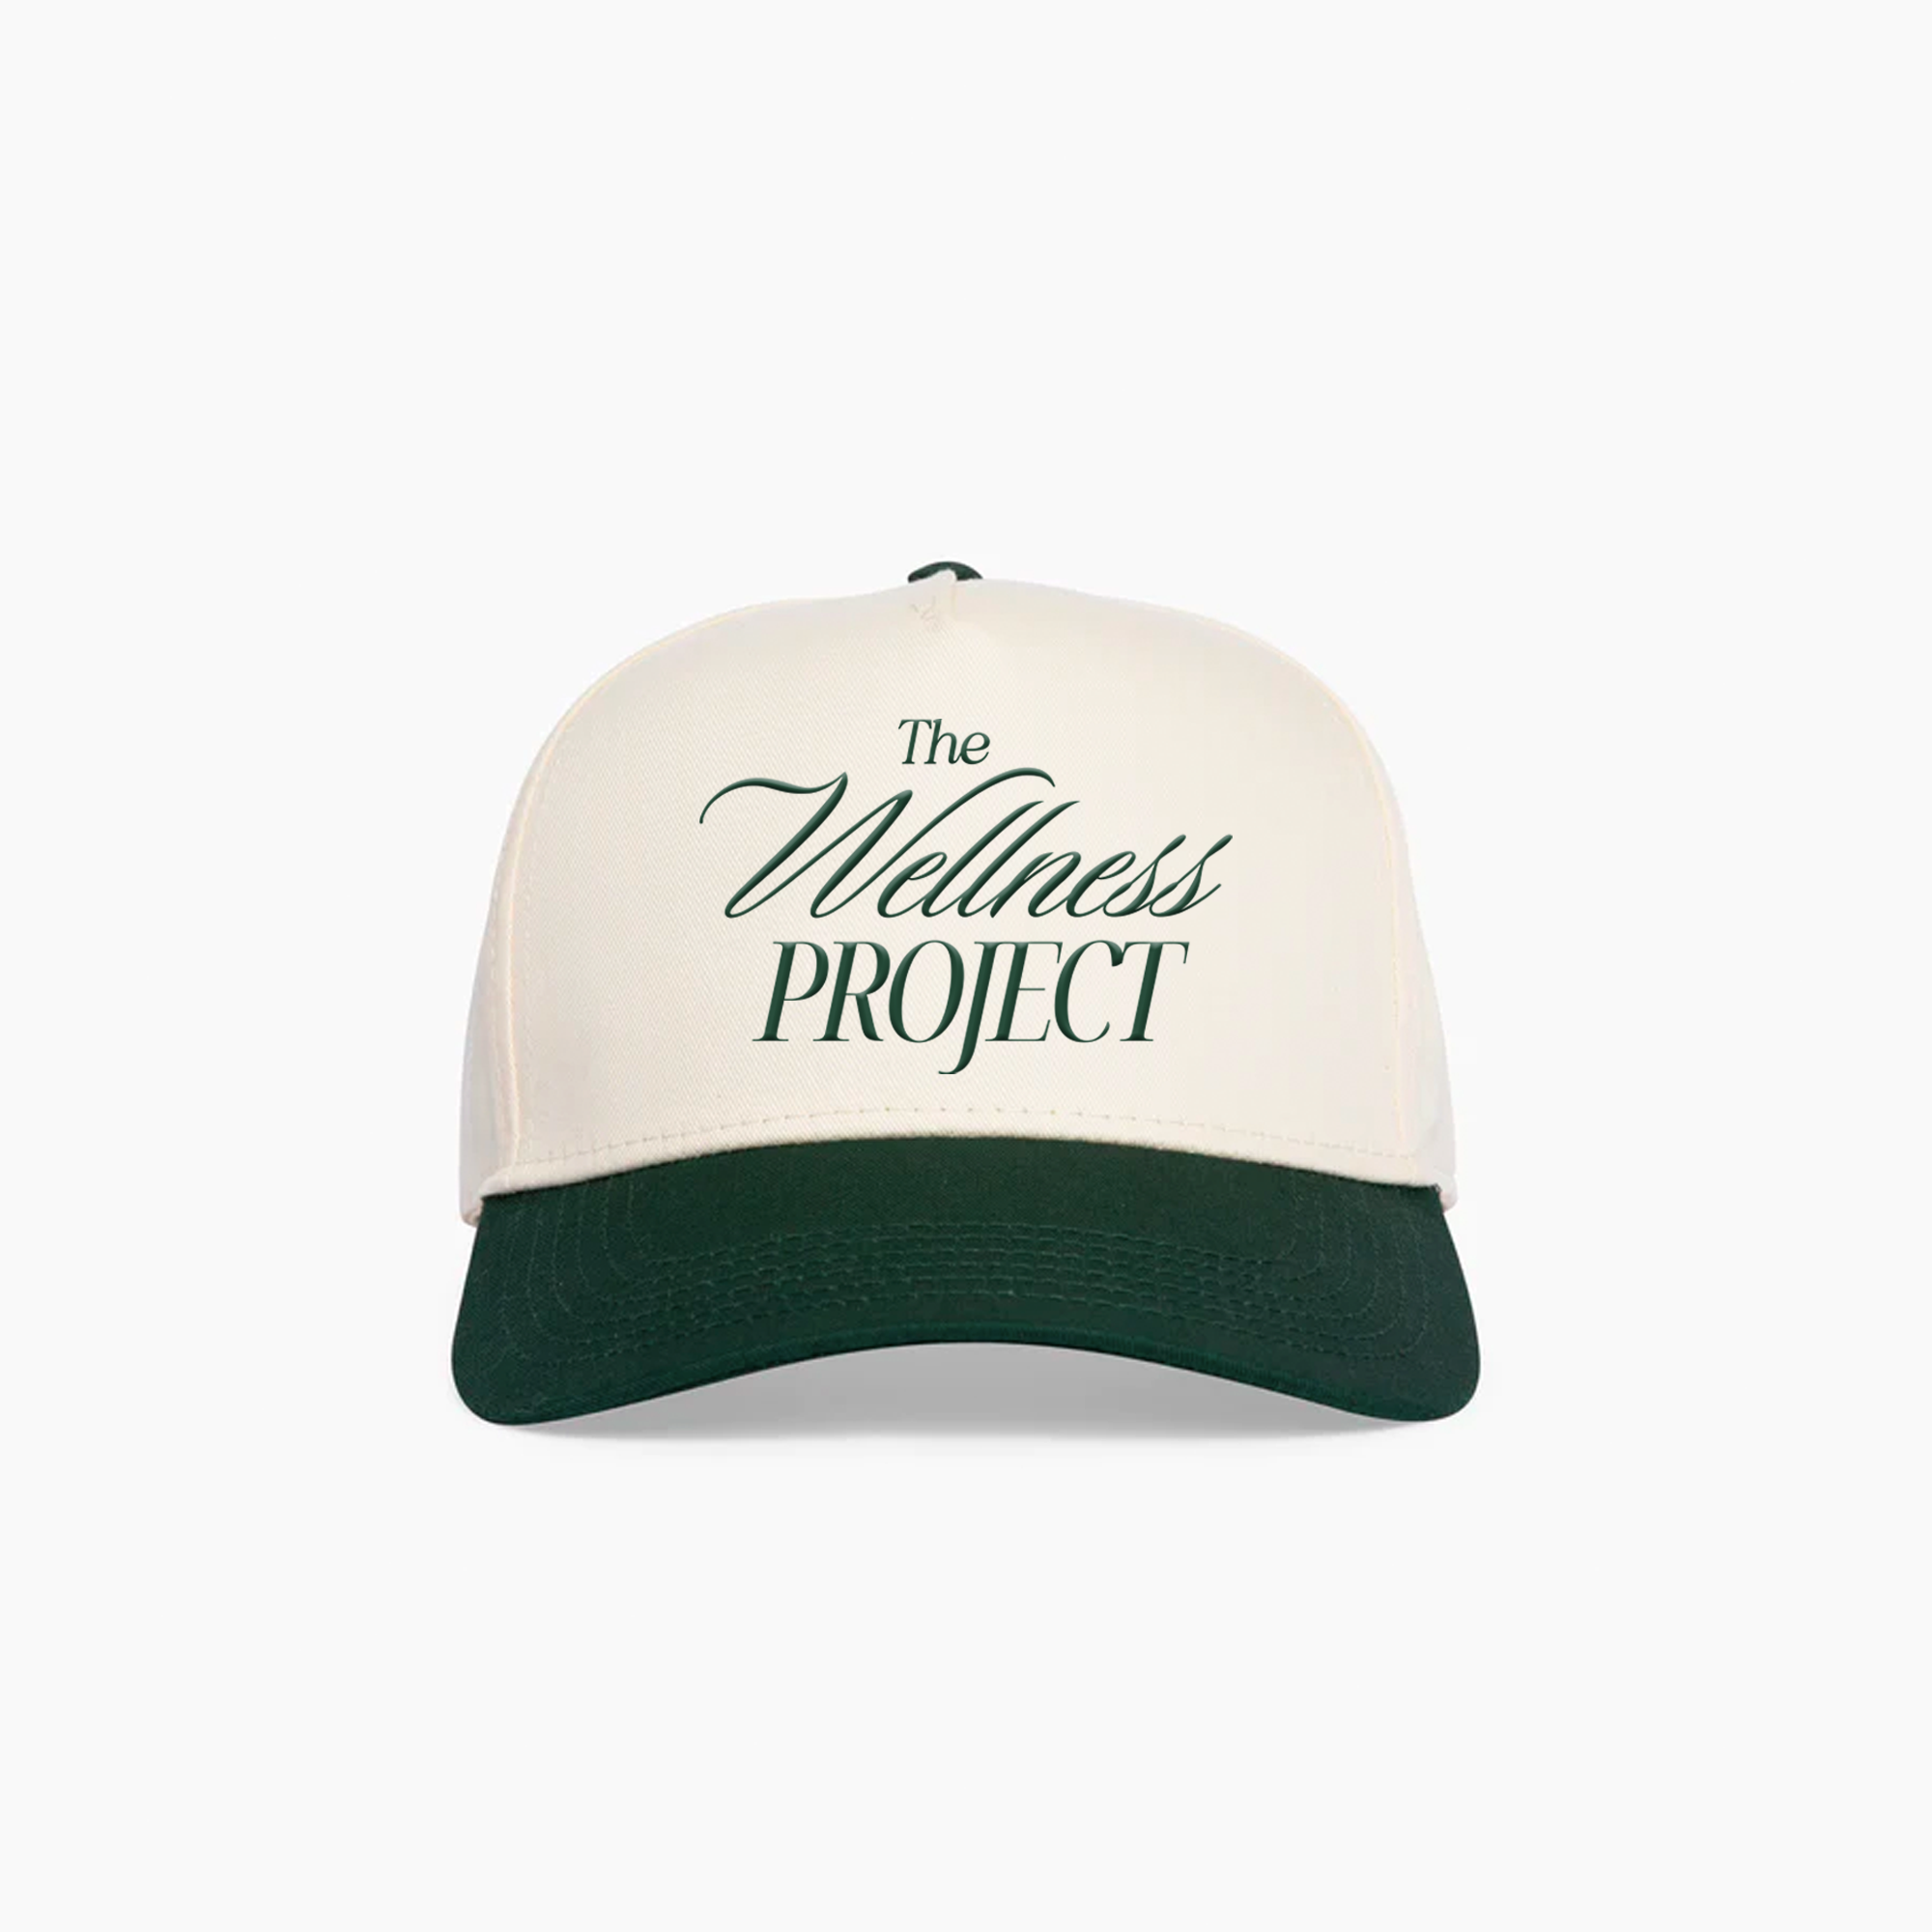 The Wellness Project Hat